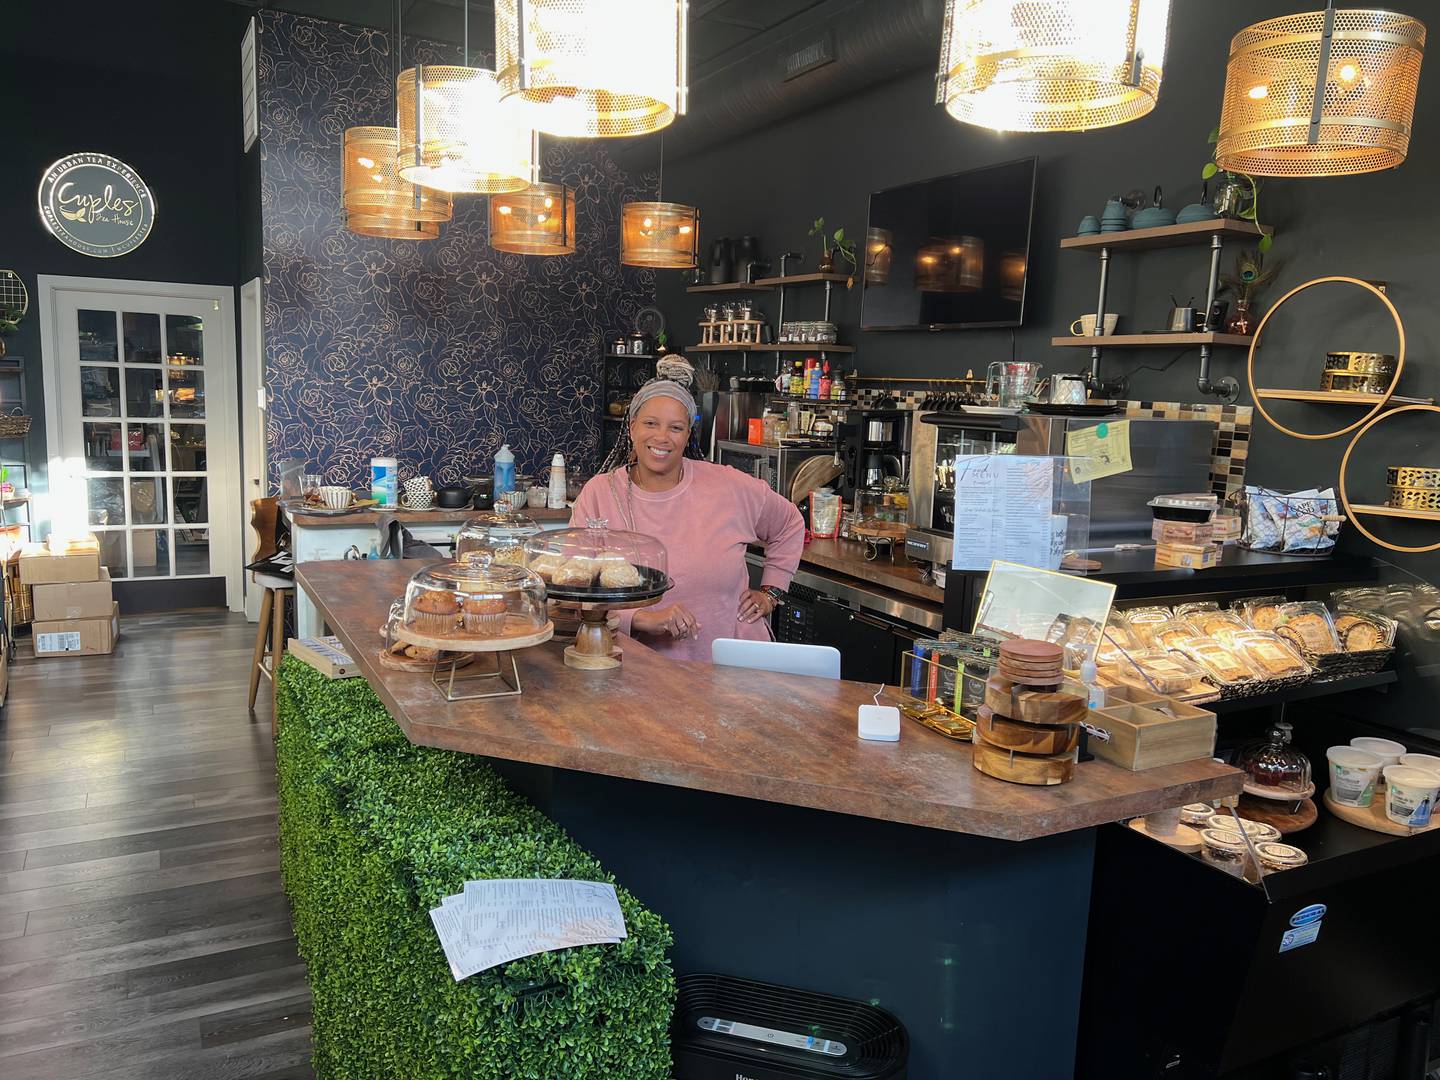 "Our vision for Cuple's Tea House was always to be inclusive of good music, good food, books, literature, culture and tea being the foundation of it all," co-owner Lynnette Dodson said.